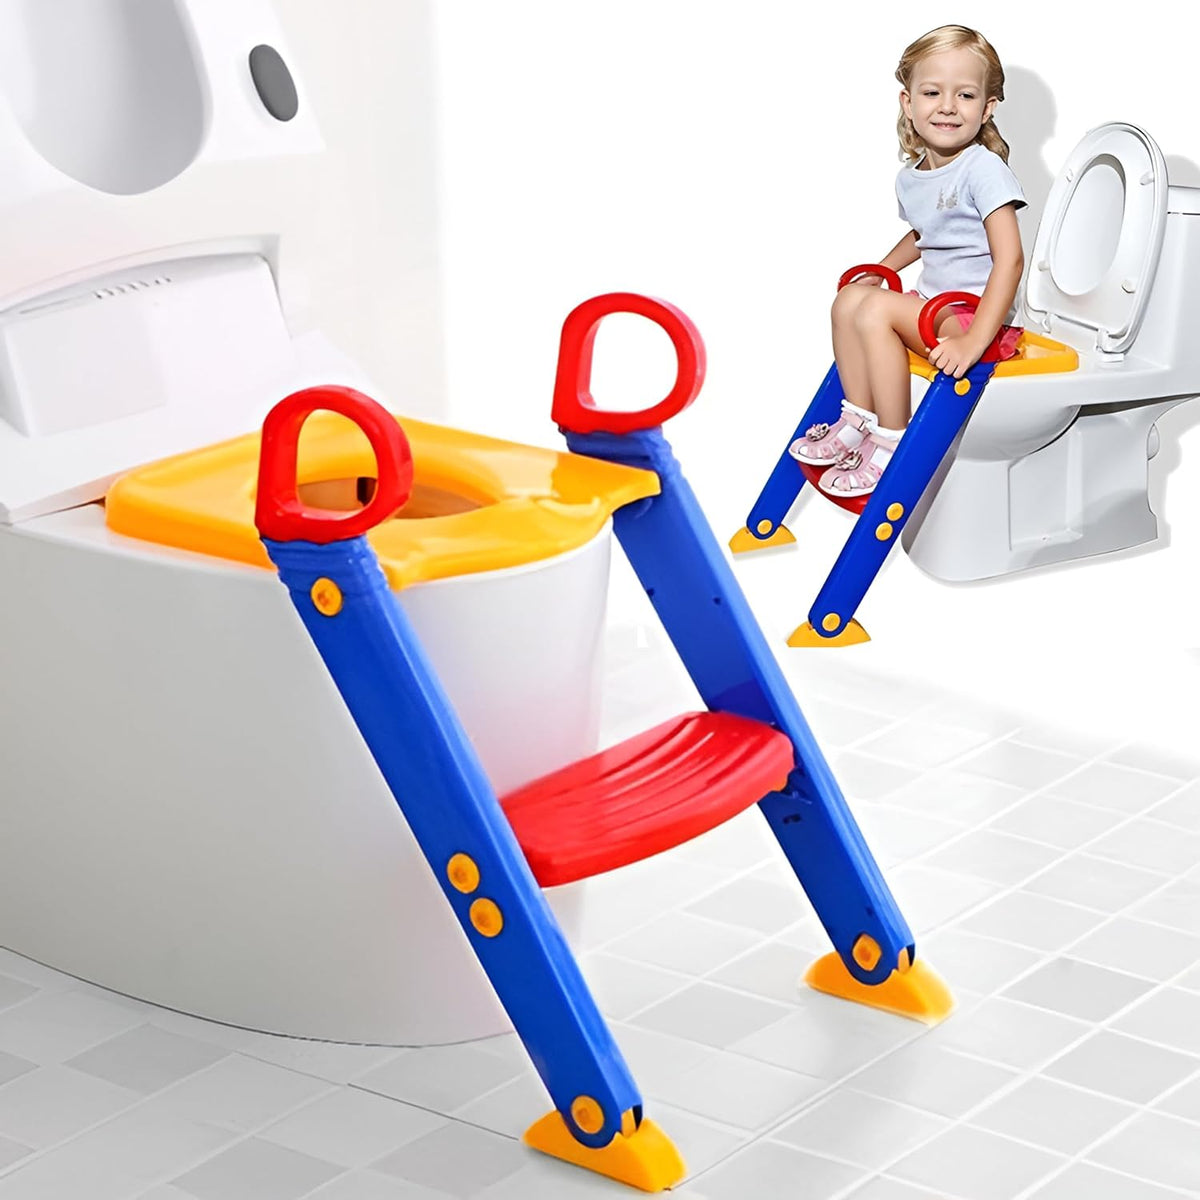 Kids Toilet Potty Training Seat with Step Stool Ladder - Comfortable and Safe, Anti-Slip Pads Included